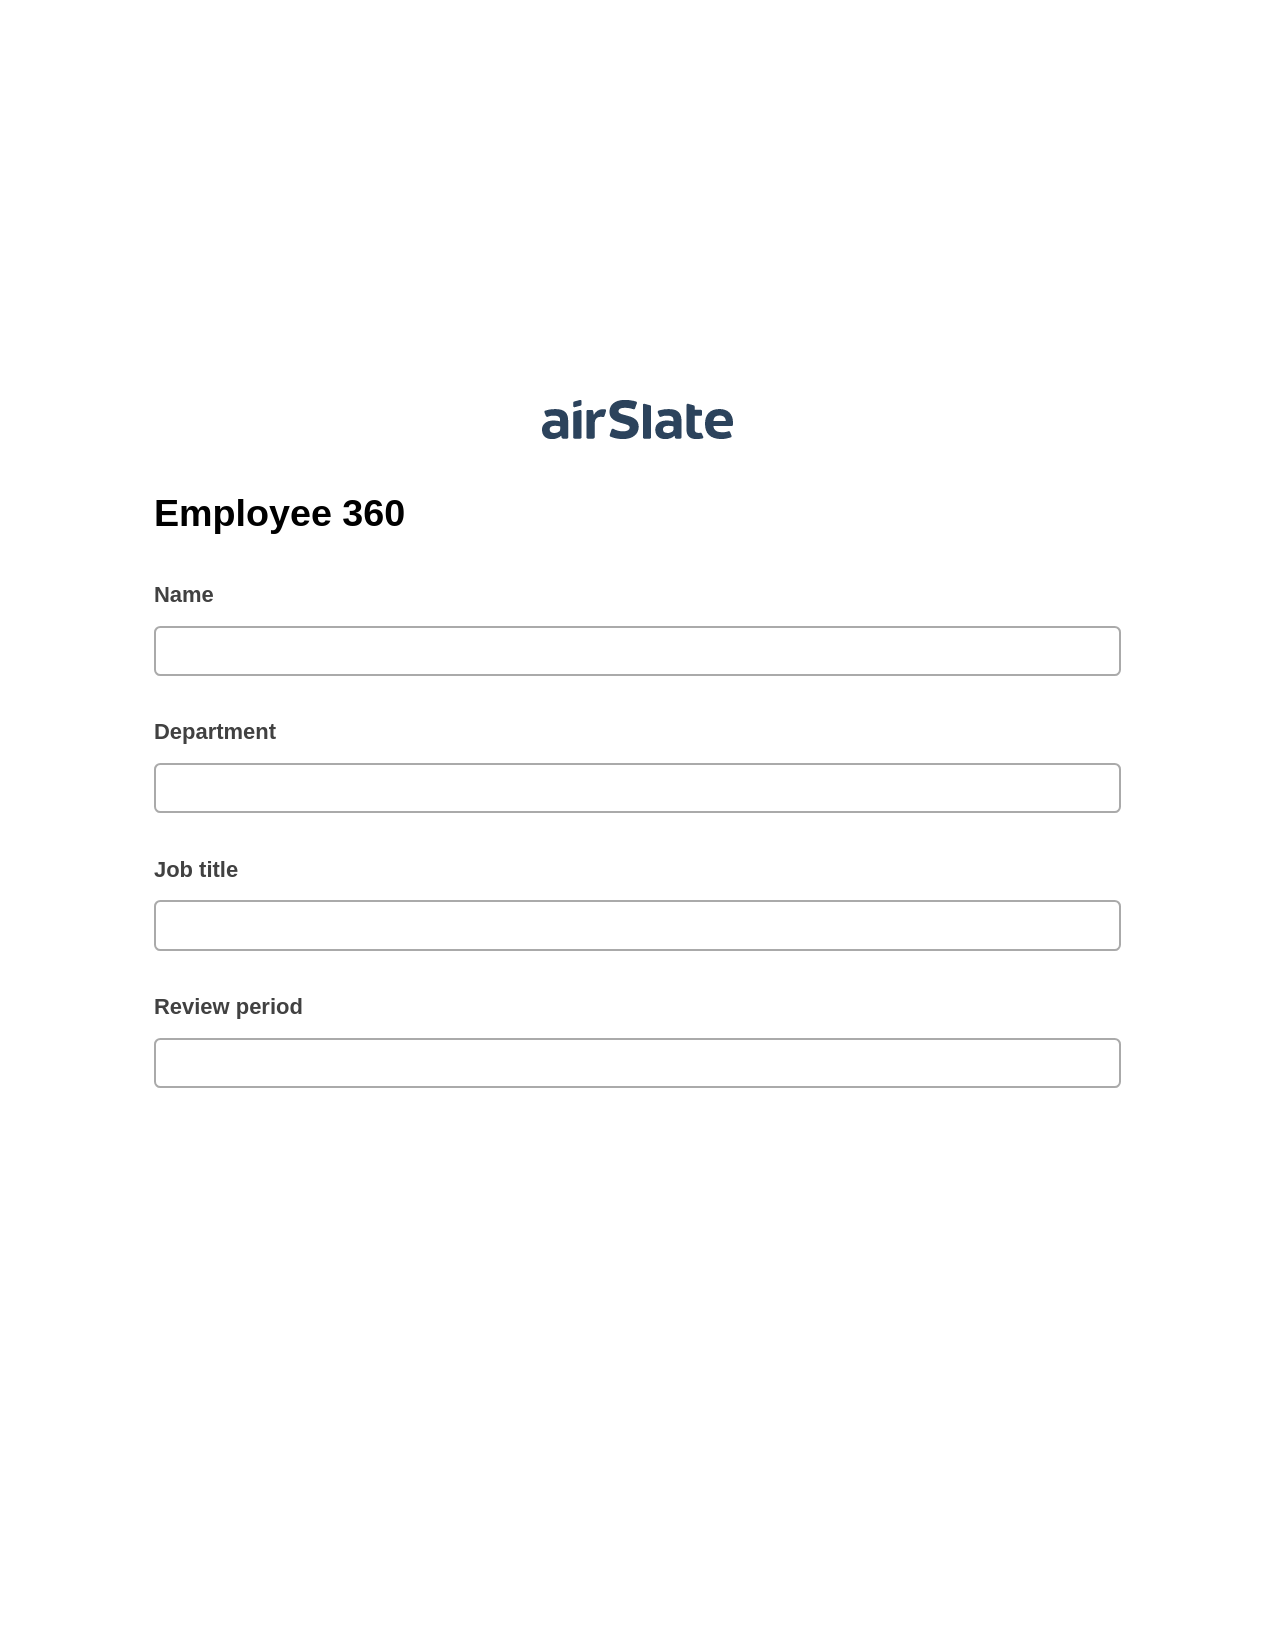 Multirole Employee 360 Pre-fill from Google Sheets Bot, Reminder Bot, Archive to SharePoint Folder Bot